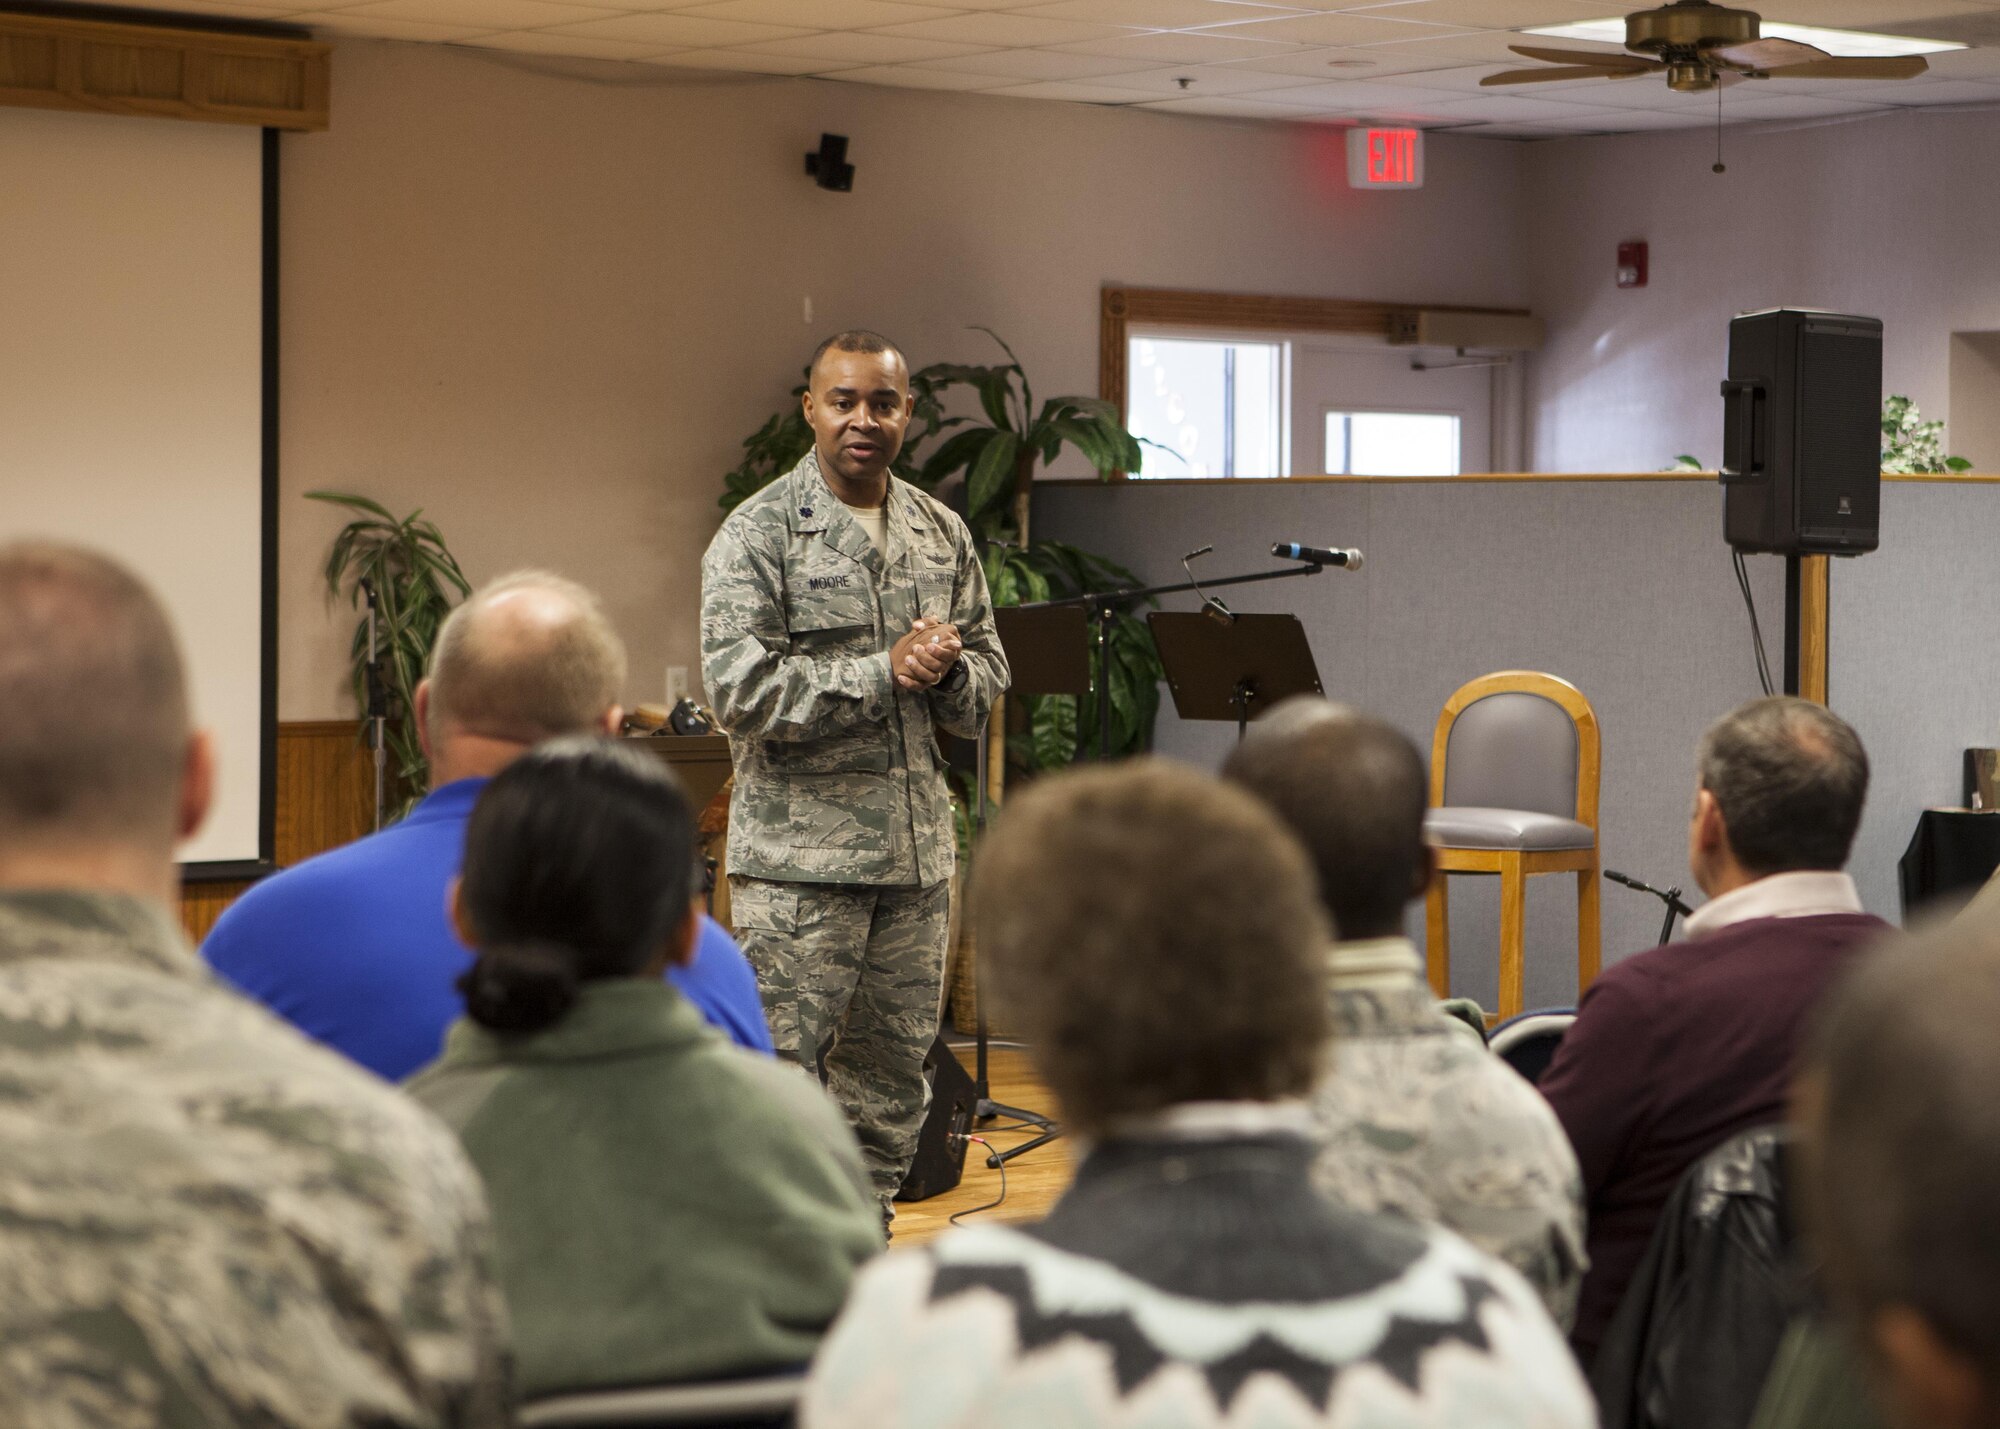 Lt. Col. Tytonia Moore, 90th Missile Wing chief of safety, speaks to wing staff personnel on F.E. Warren Air Force Base, Wyo., Jan. 11, 2016, during a 20th Air Force Safety Down-Day. The down day was part of a 20th Air Force wide initiative to reinforce safety as a high priority. (U.S. Air Force photo by Lan Kim)